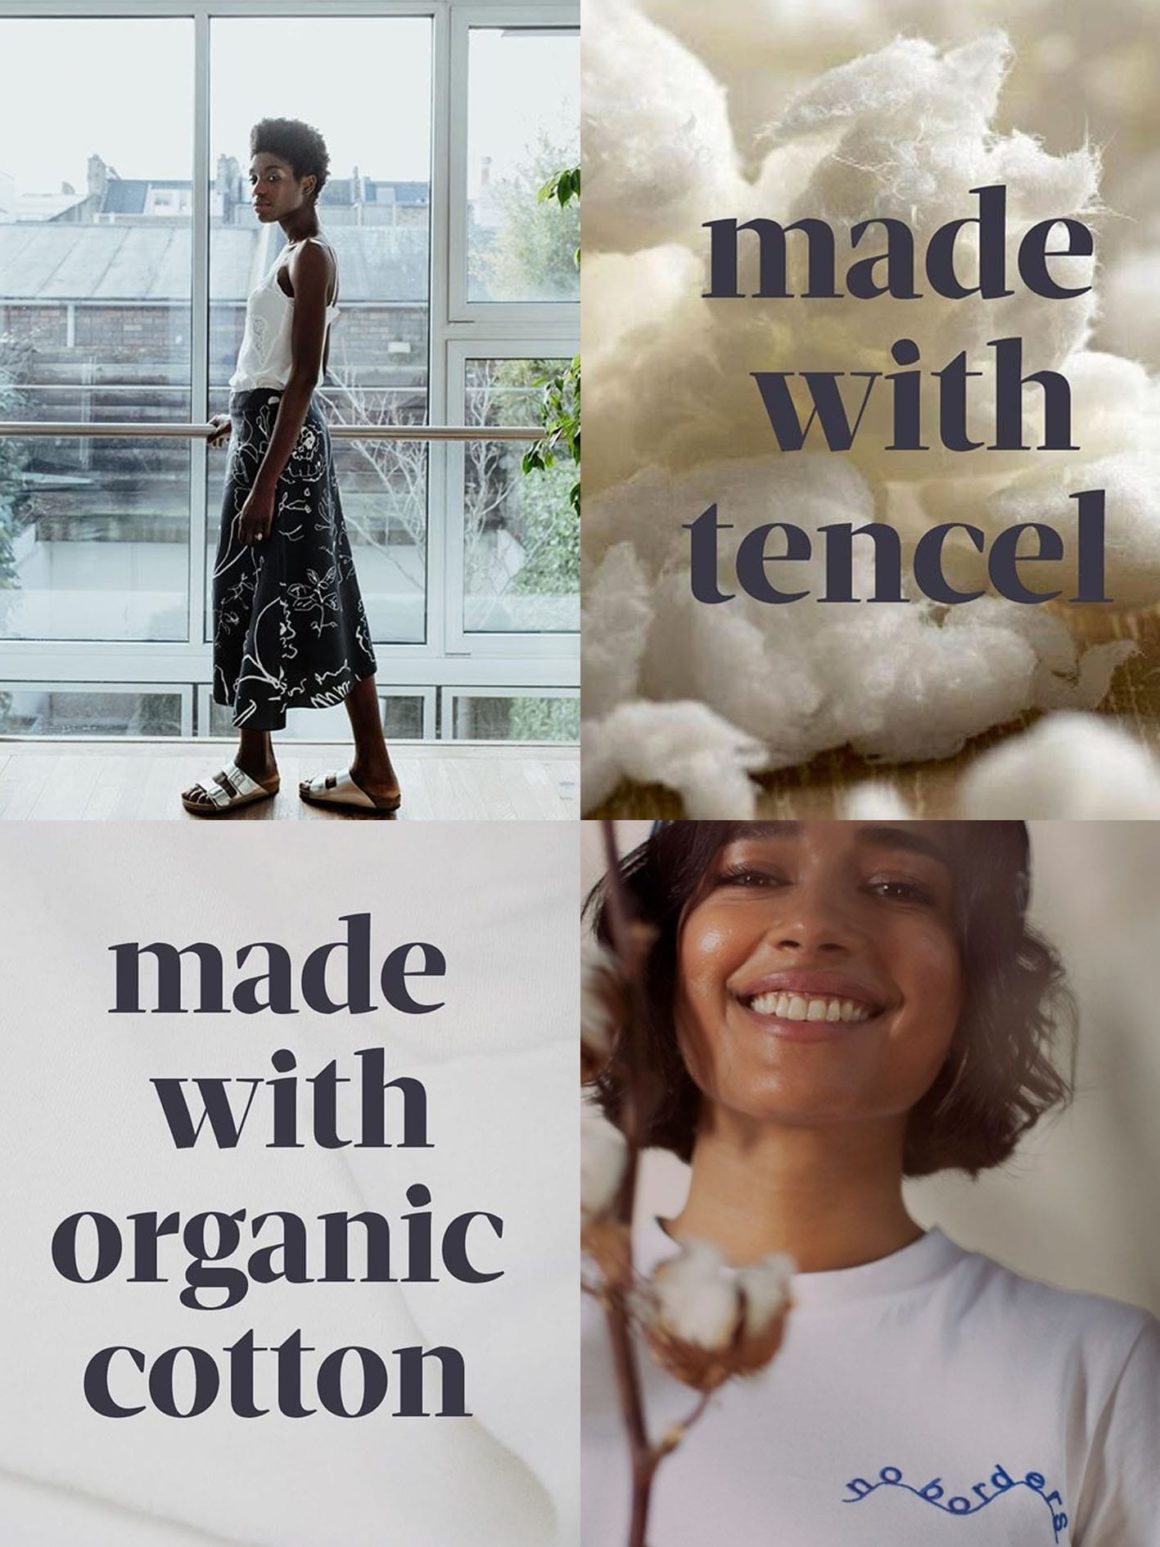 Ethical brands which illuminate inclusivity